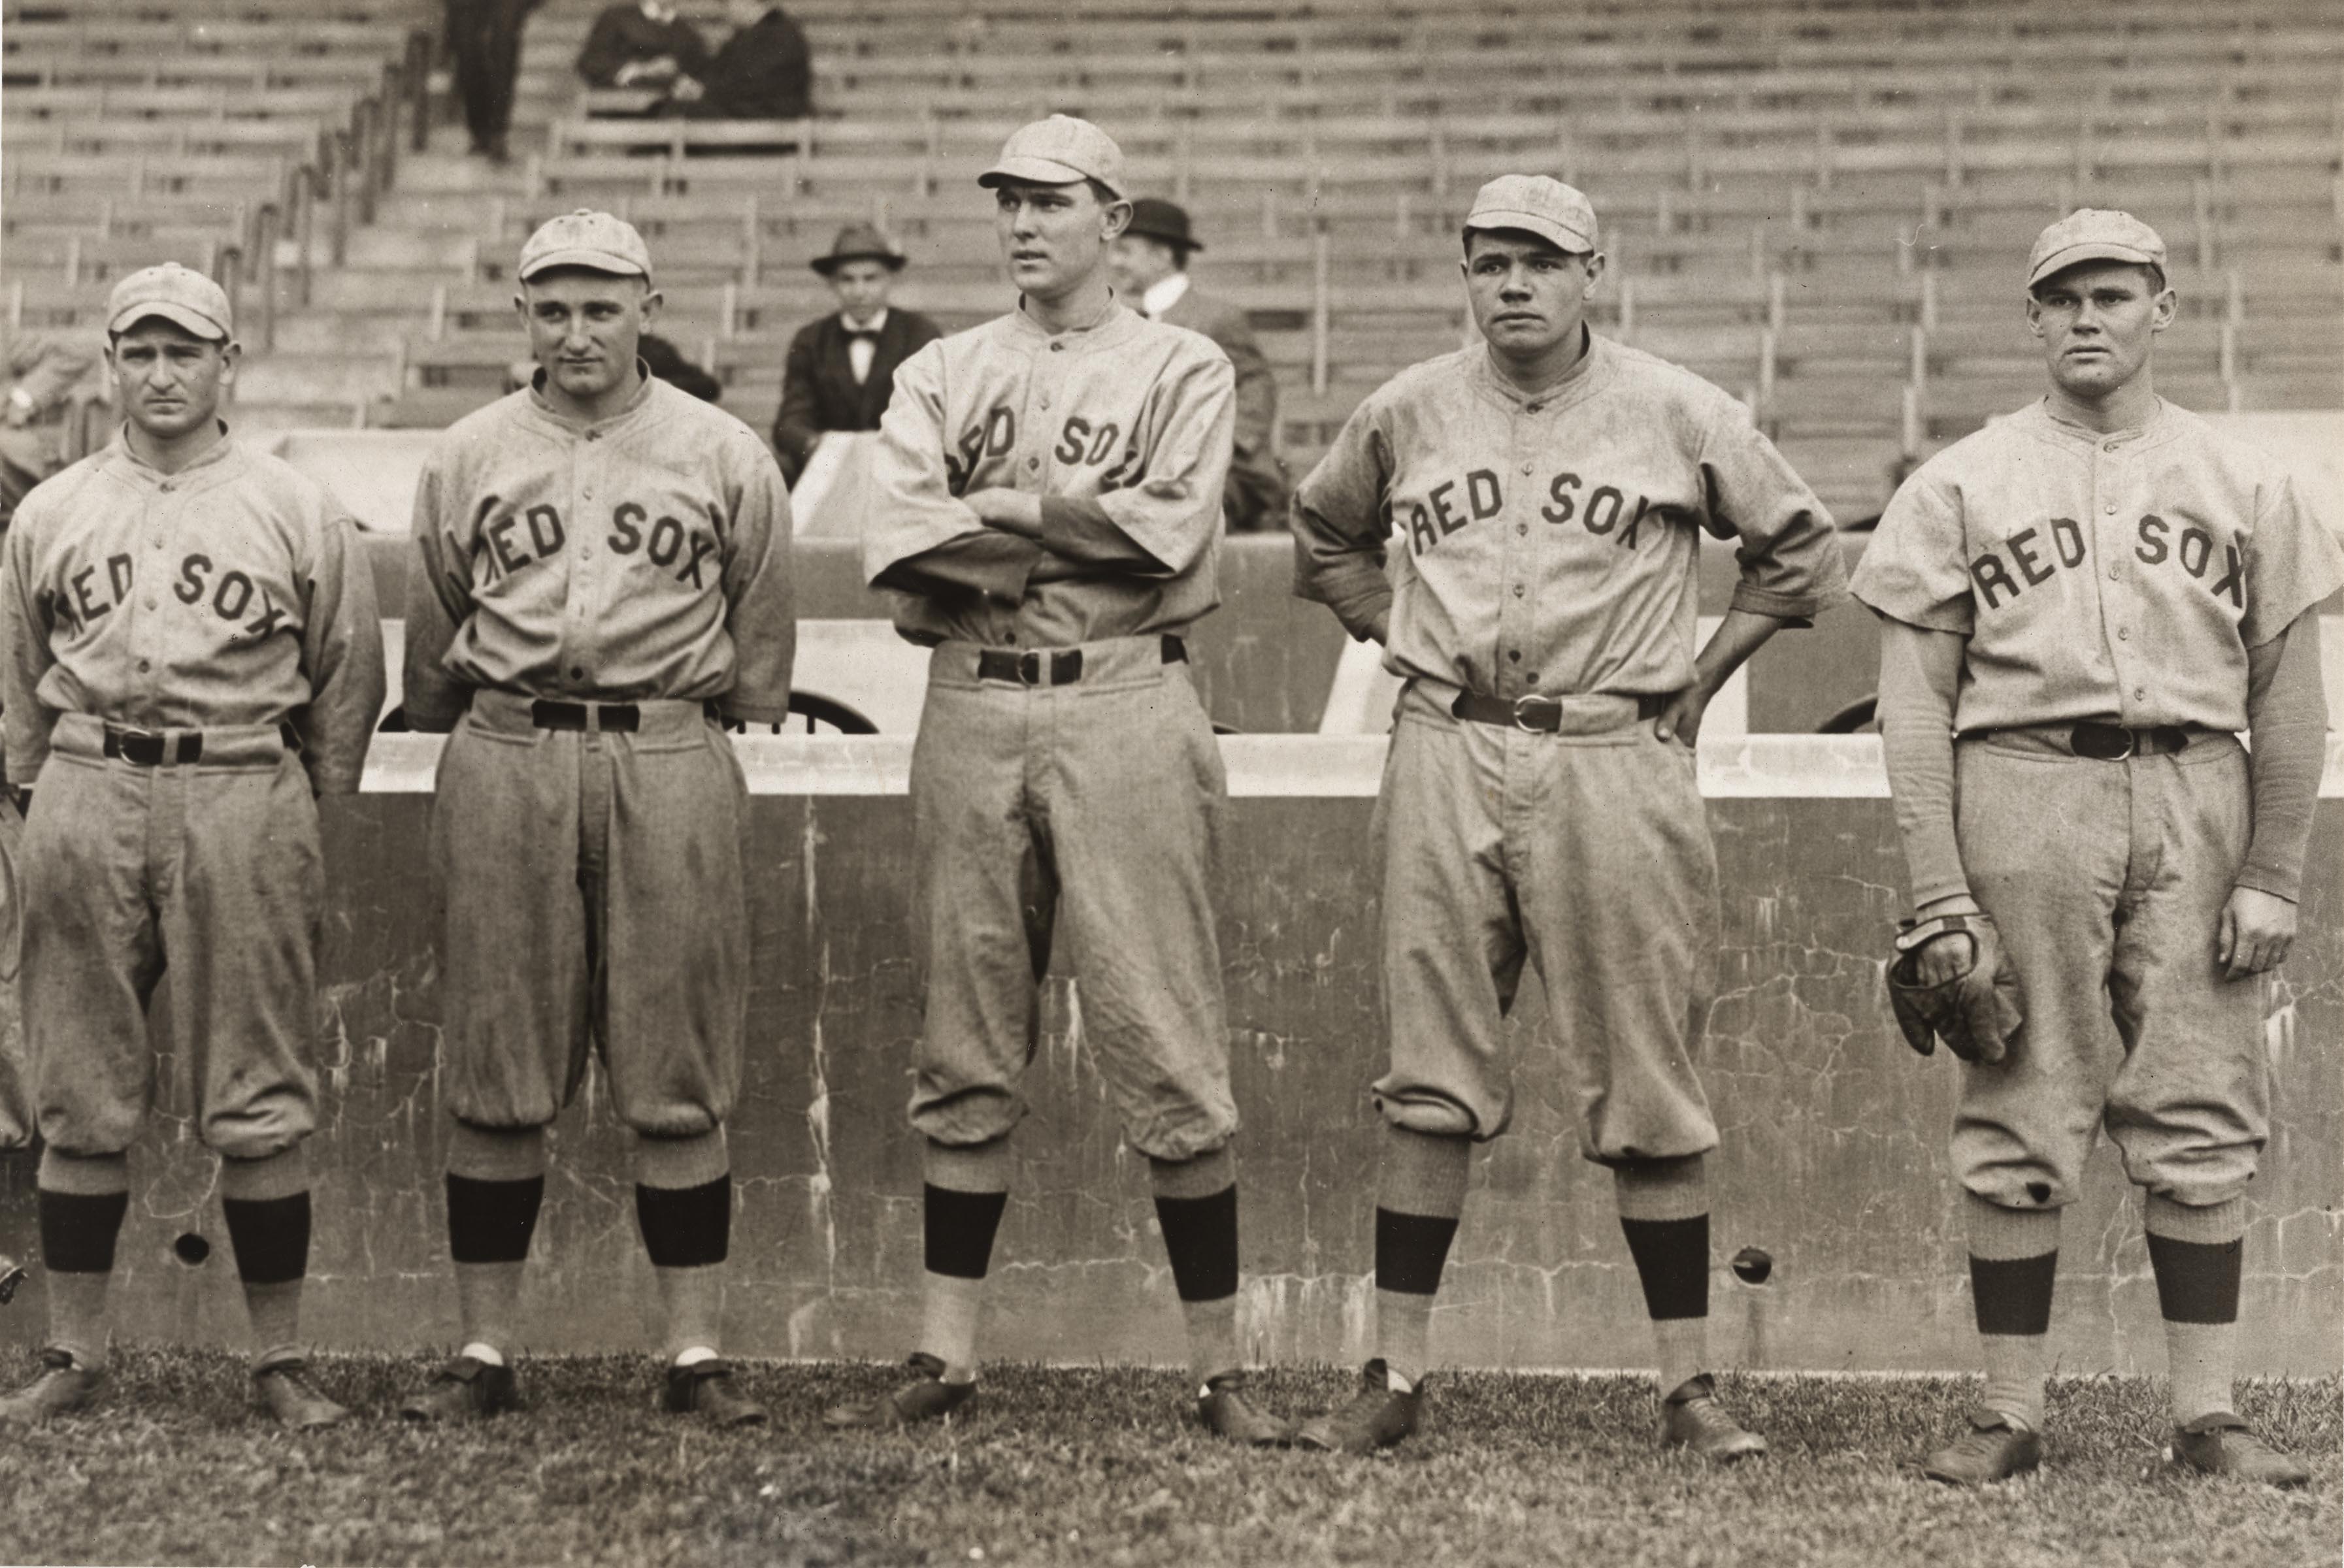 Which team did Babe Ruth play for before joining the New York Yankees?